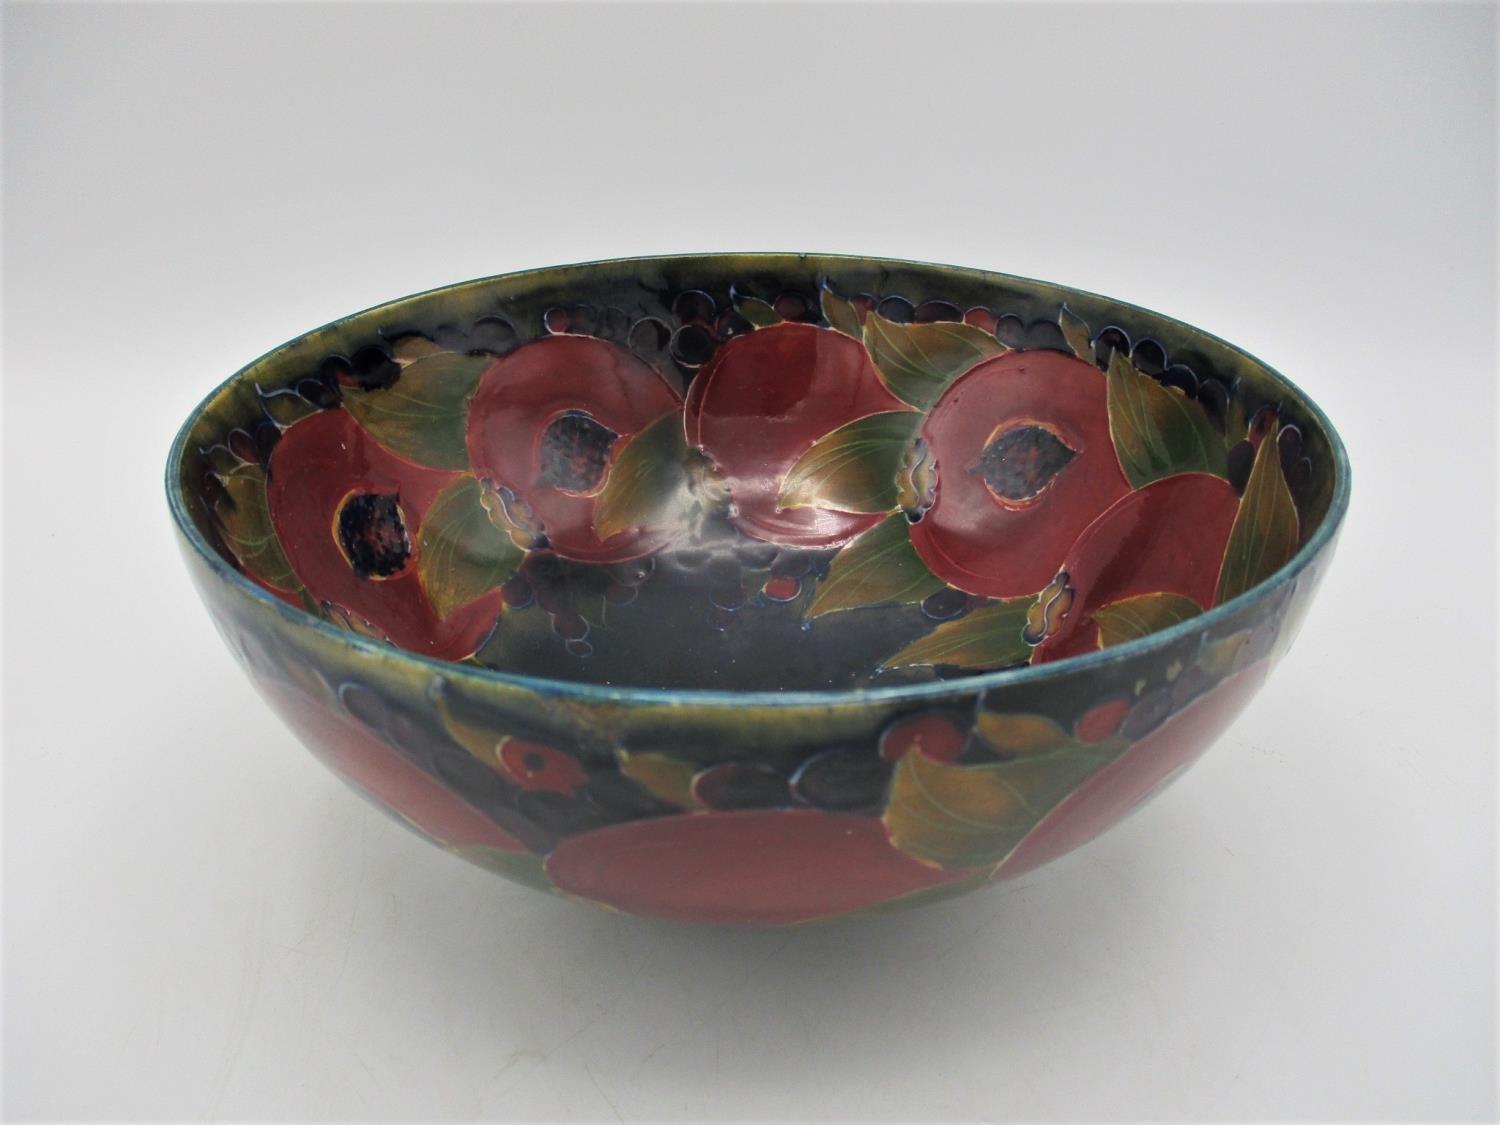 A large William Moorcroft bowl in the pomegranate pattern, raised on a small circular base, with